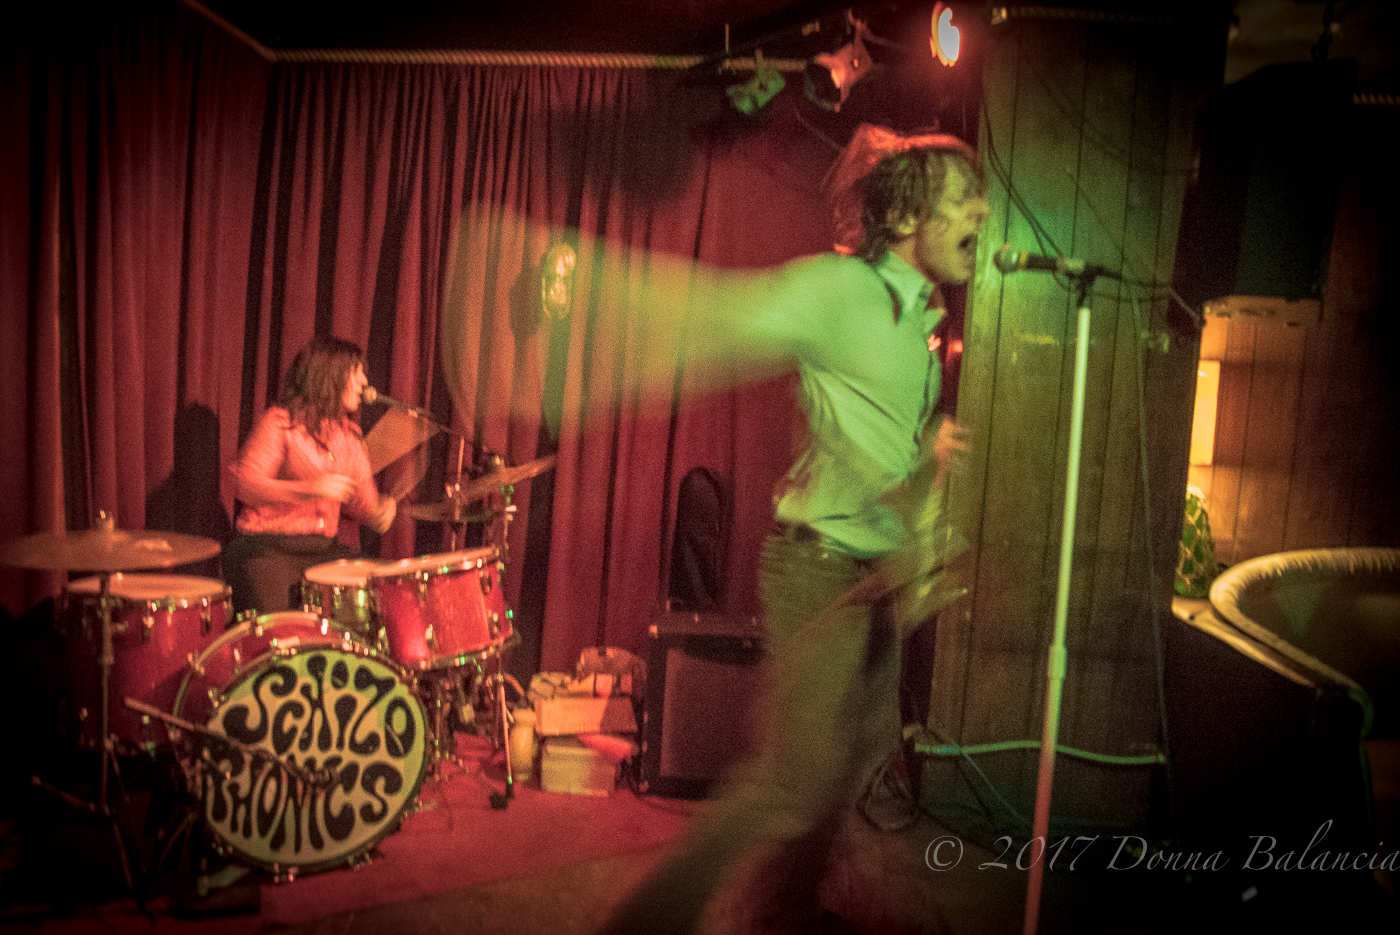 Schizophonics put on a show that is not to be believed - Photo by Donna Balancia